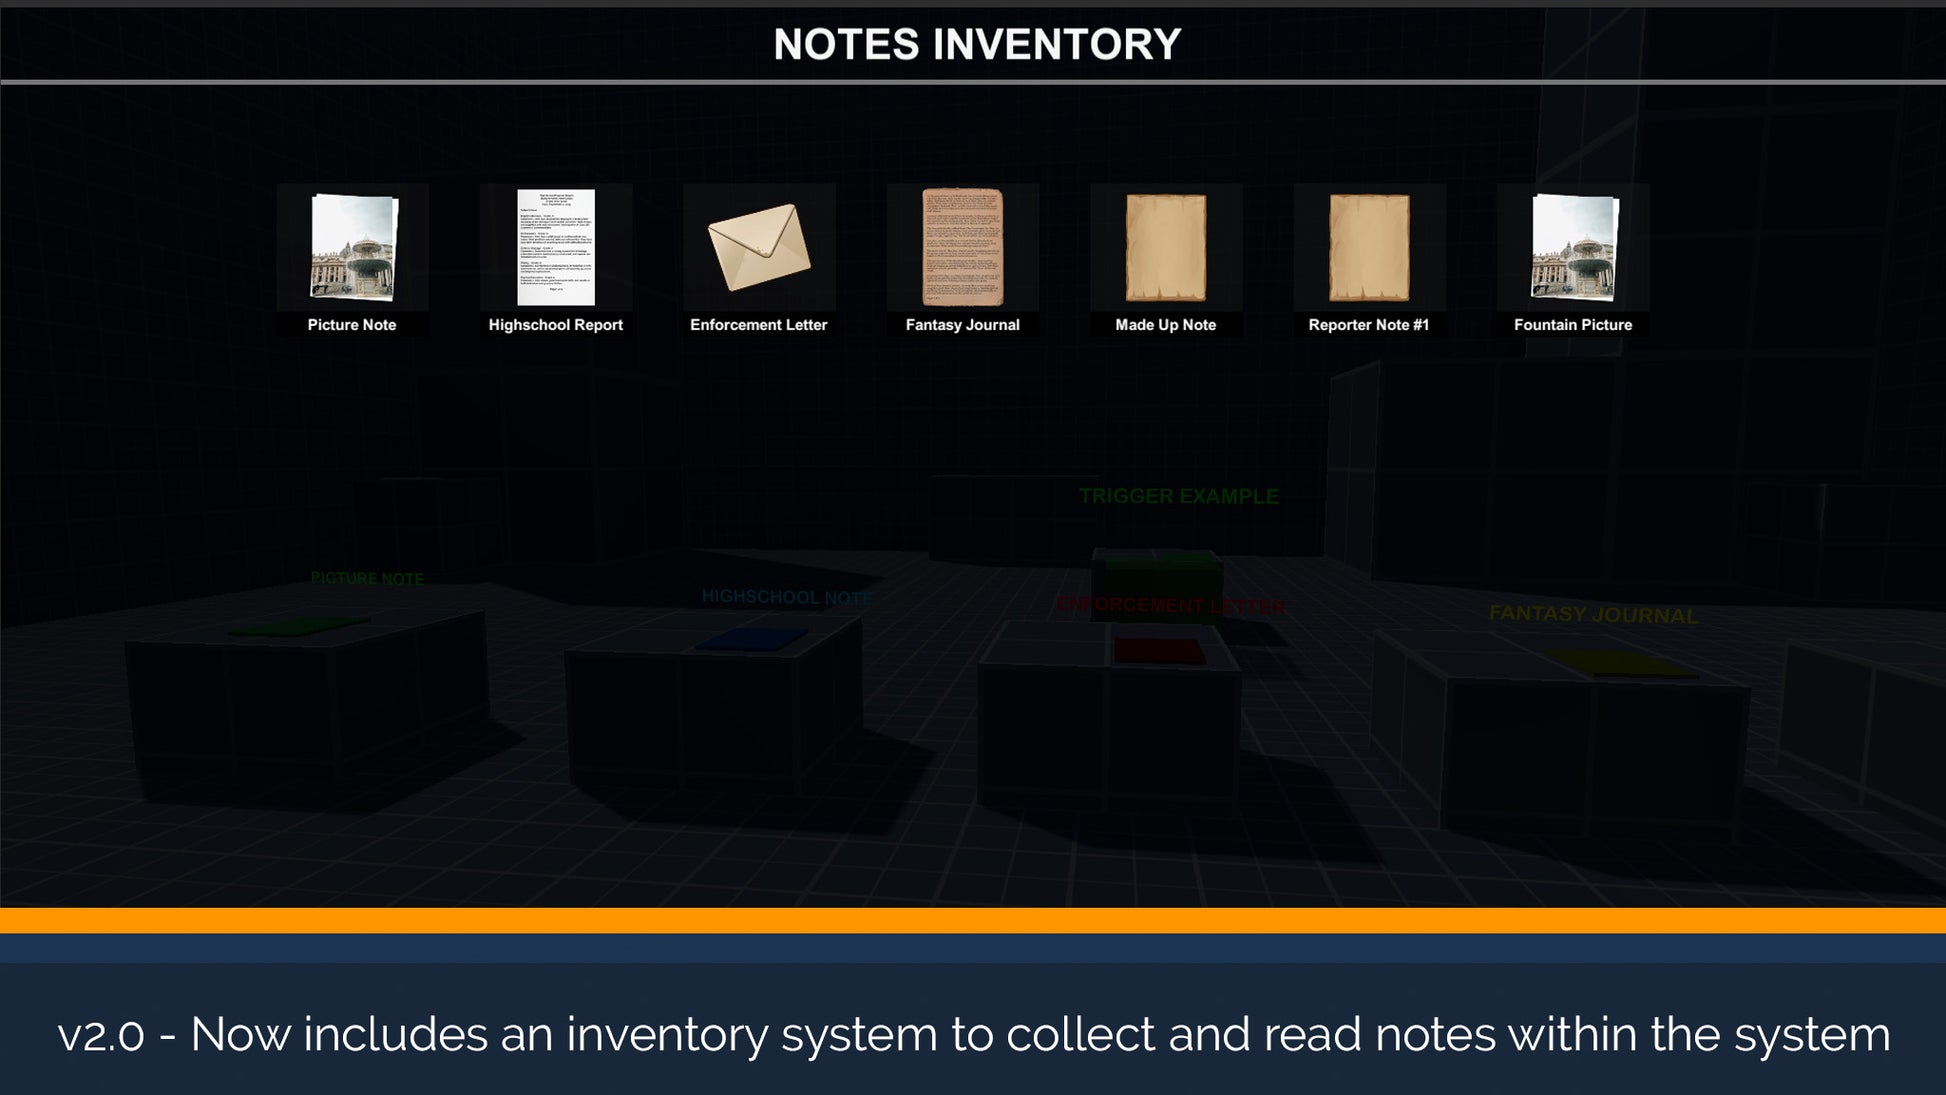 screenshot of inventory of notes system